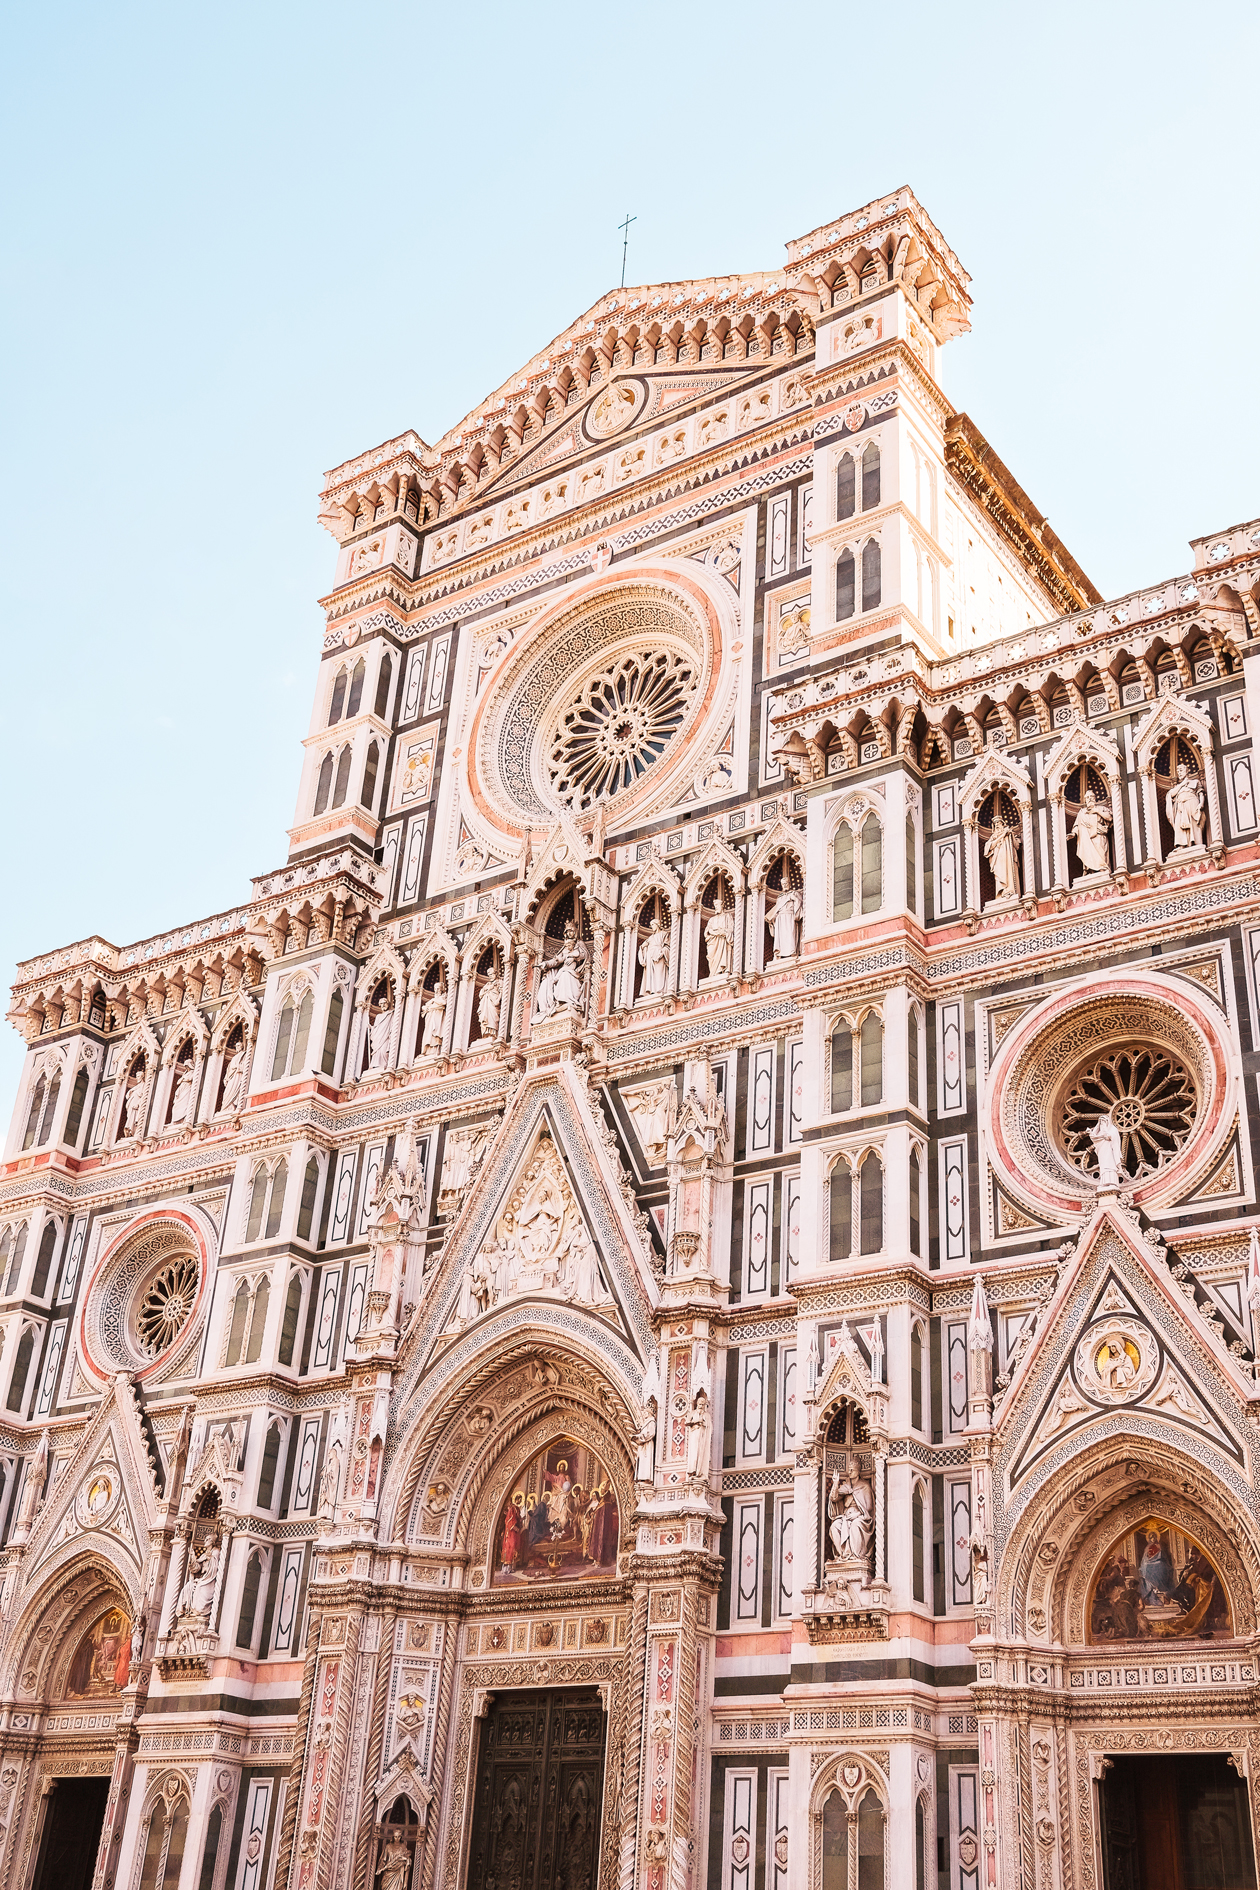 We went to Italy for our honeymoon and here's how we spent 5 days in Florence. If you want a travel guide to Florence, Italy (including where to shop, what to eat, and what to do) this is it. Photo taken at the Duomo